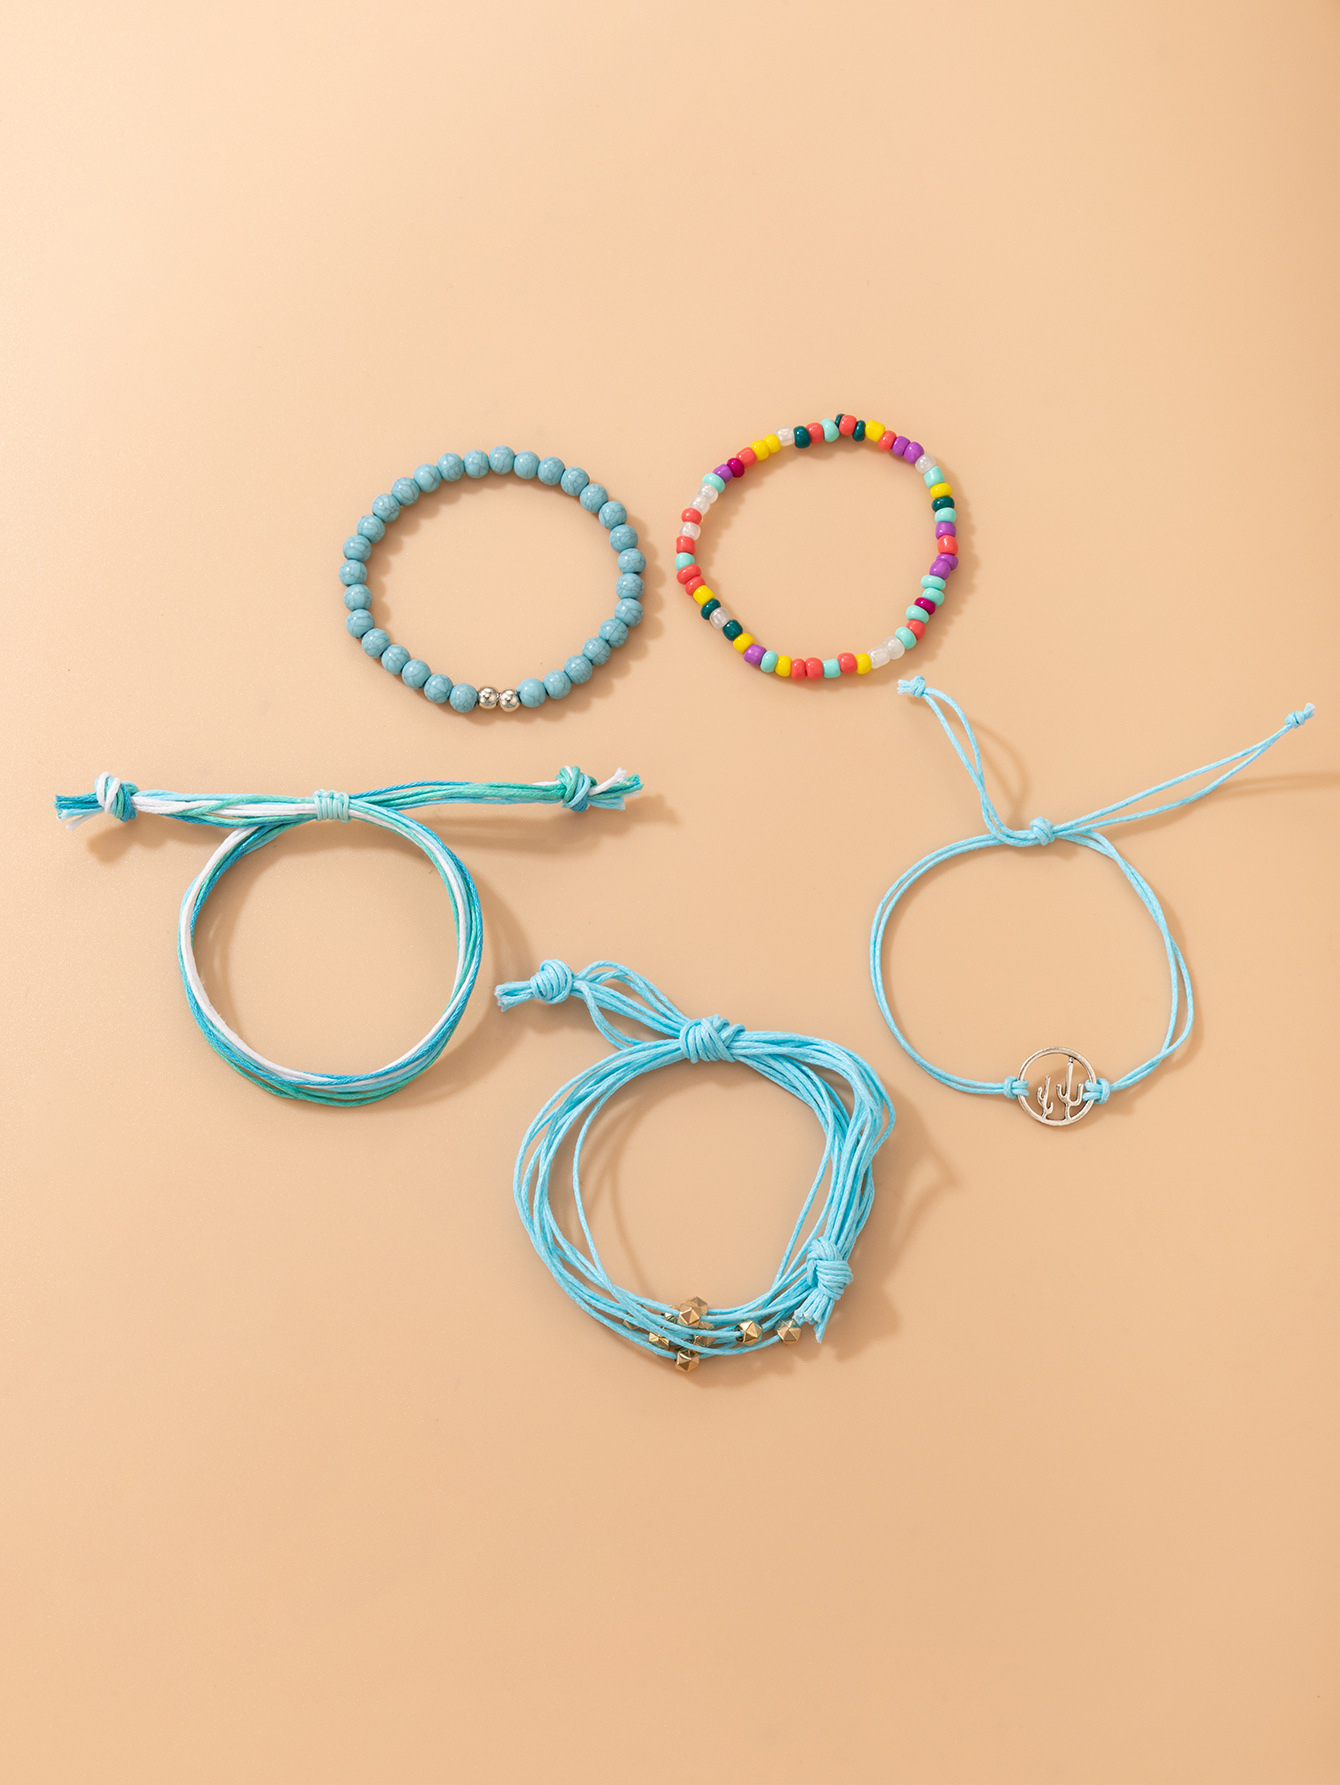 new jewelry Bohemian style color rice beads fivepiece bracelet braided rope bracelet setpicture4